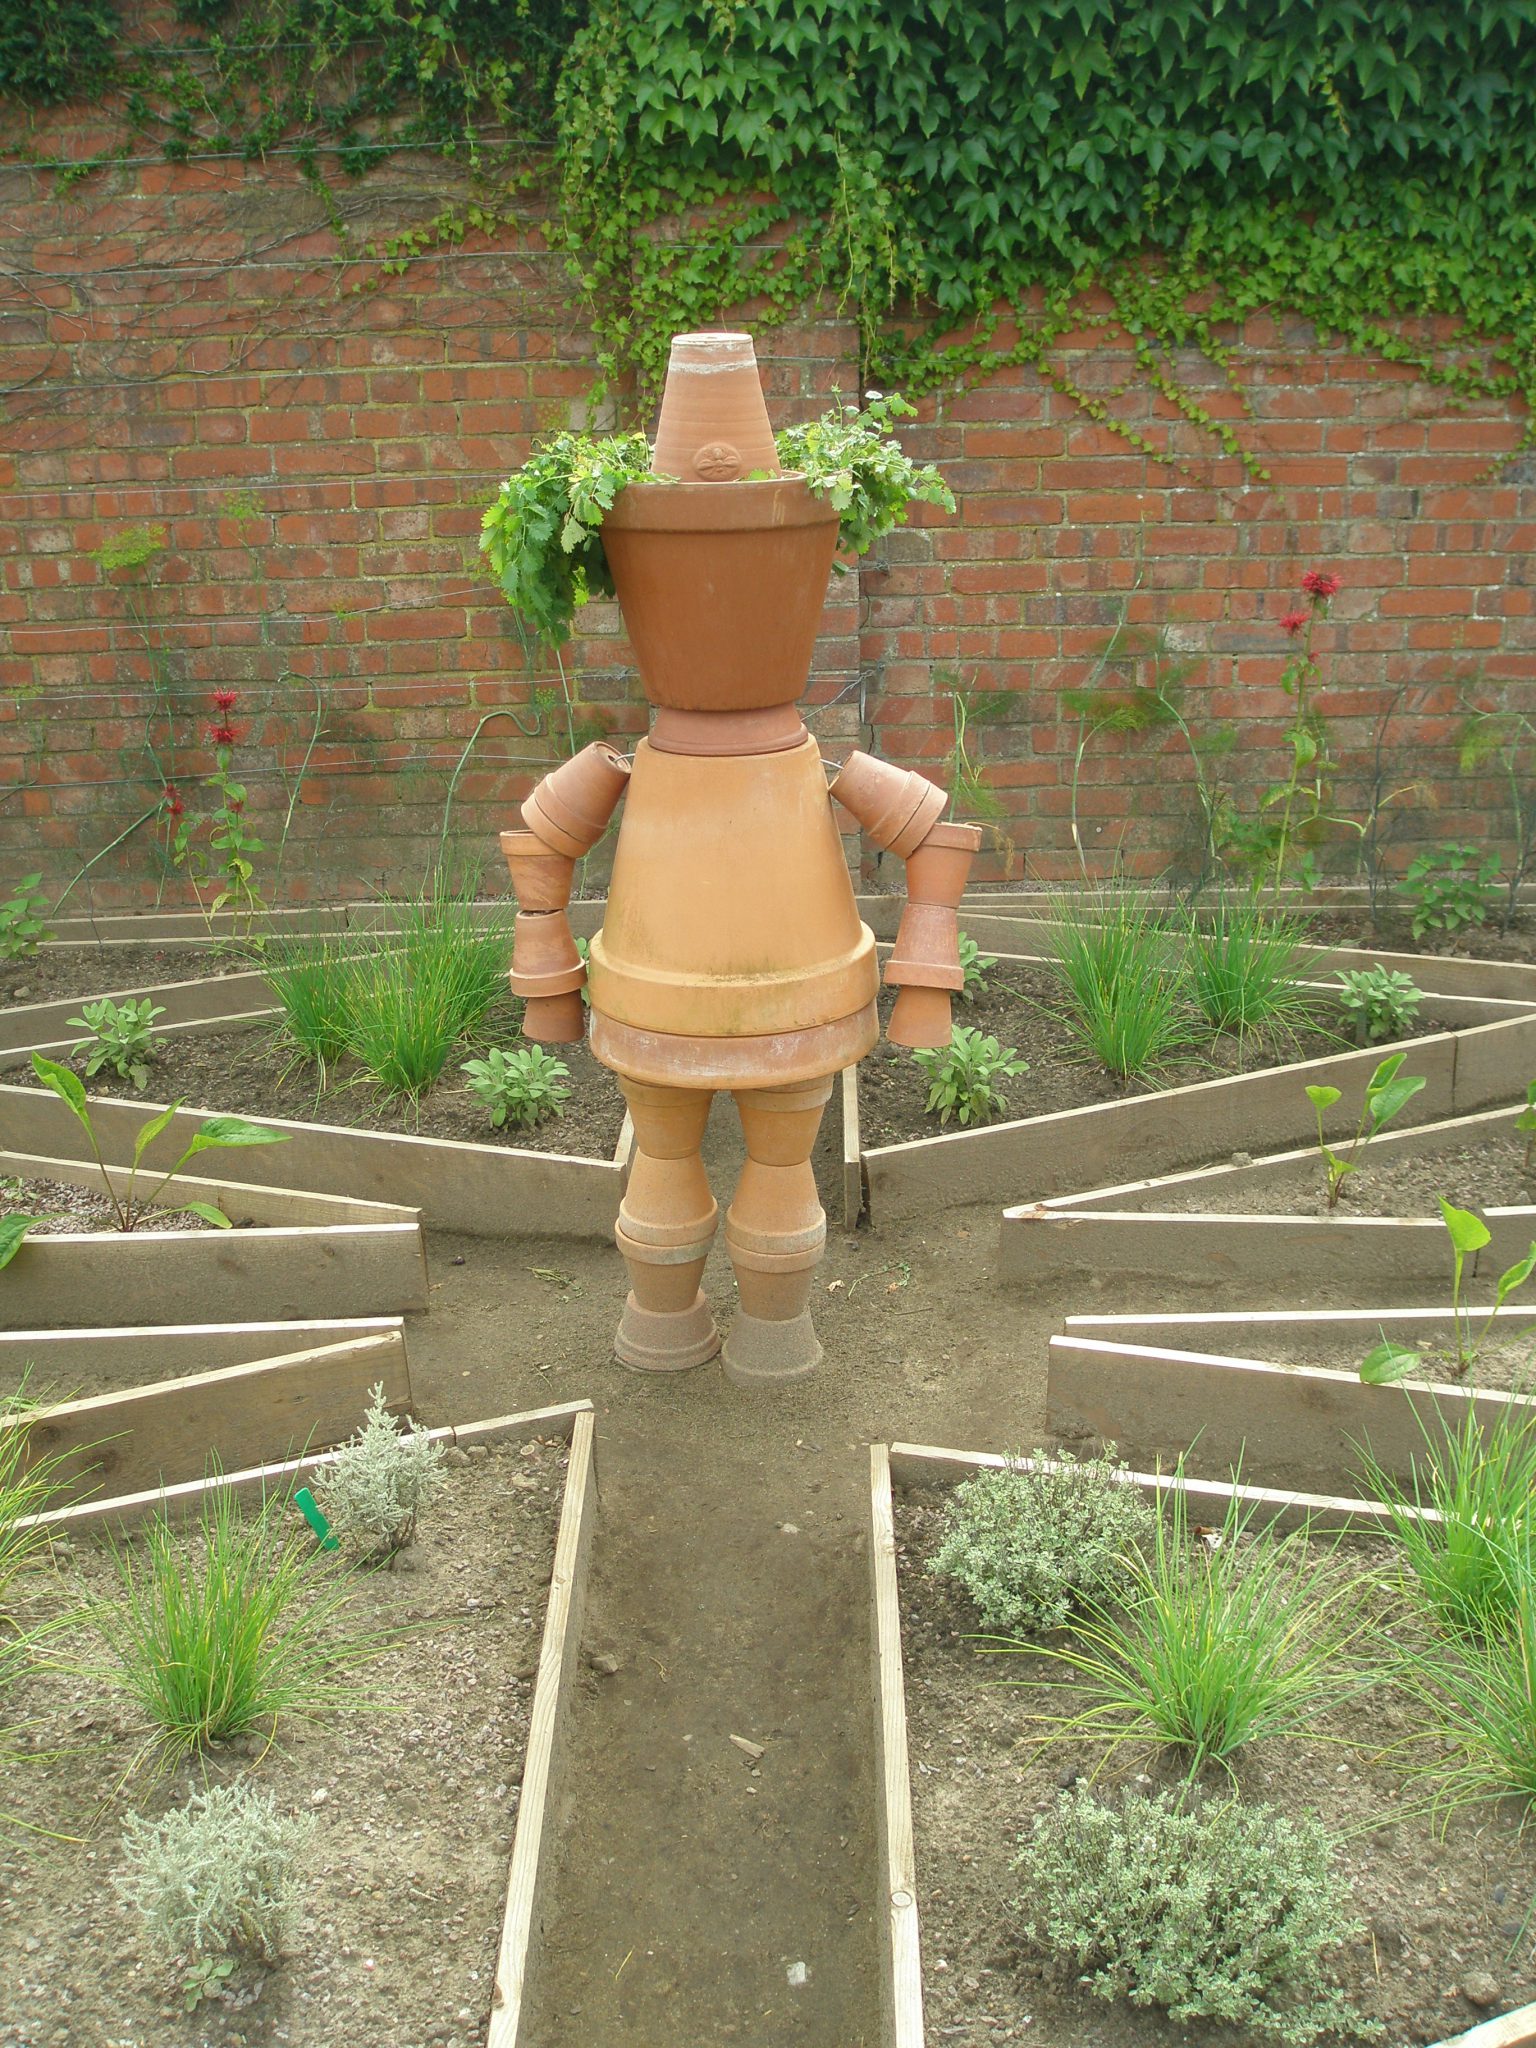 A clay-pot Scarecrow....not very scary.